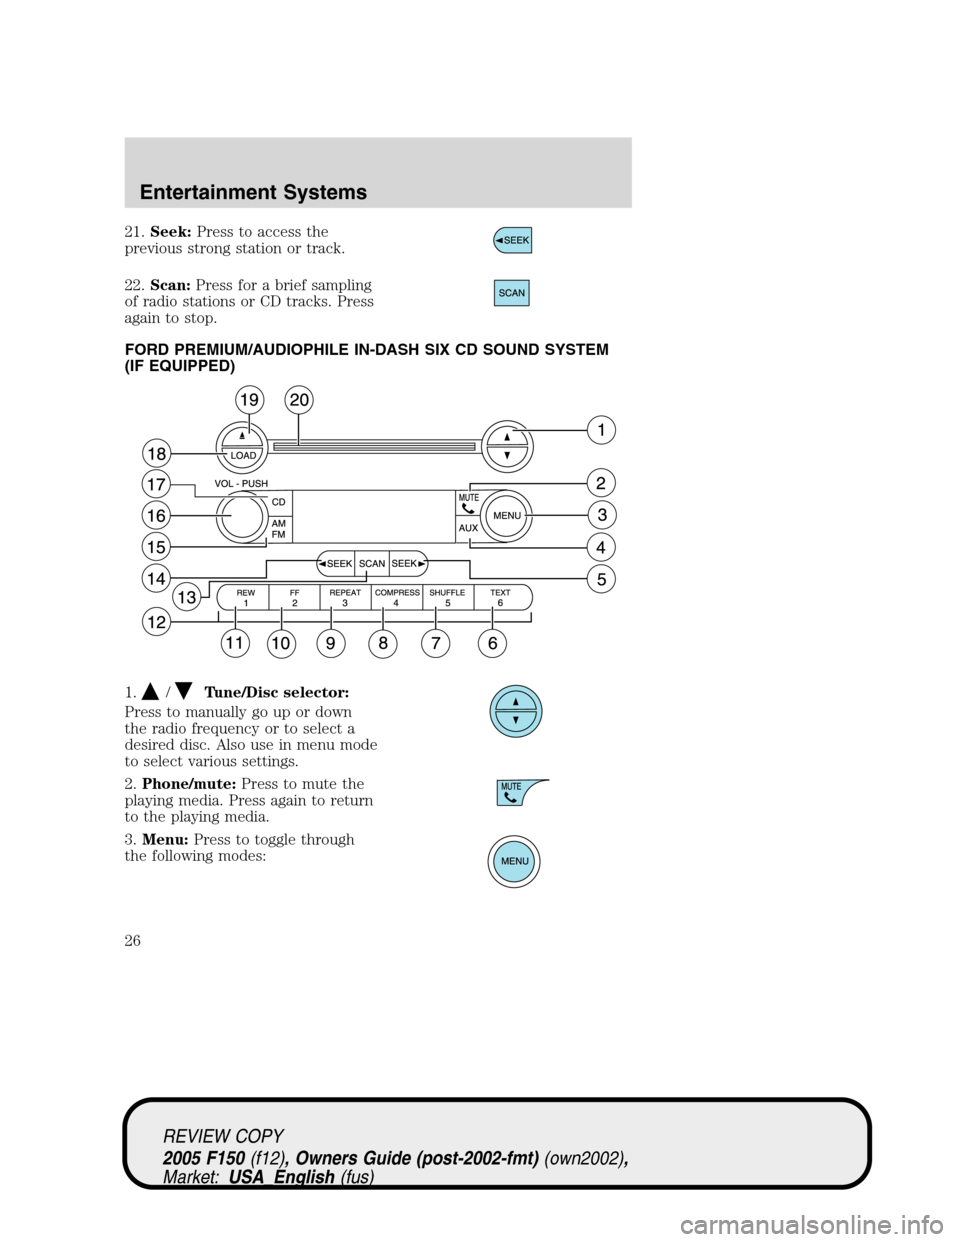 FORD F150 2005 11.G Owners Manual 21.Seek:Press to access the
previous strong station or track.
22.Scan:Press for a brief sampling
of radio stations or CD tracks. Press
again to stop.
FORD PREMIUM/AUDIOPHILE IN-DASH SIX CD SOUND SYSTE